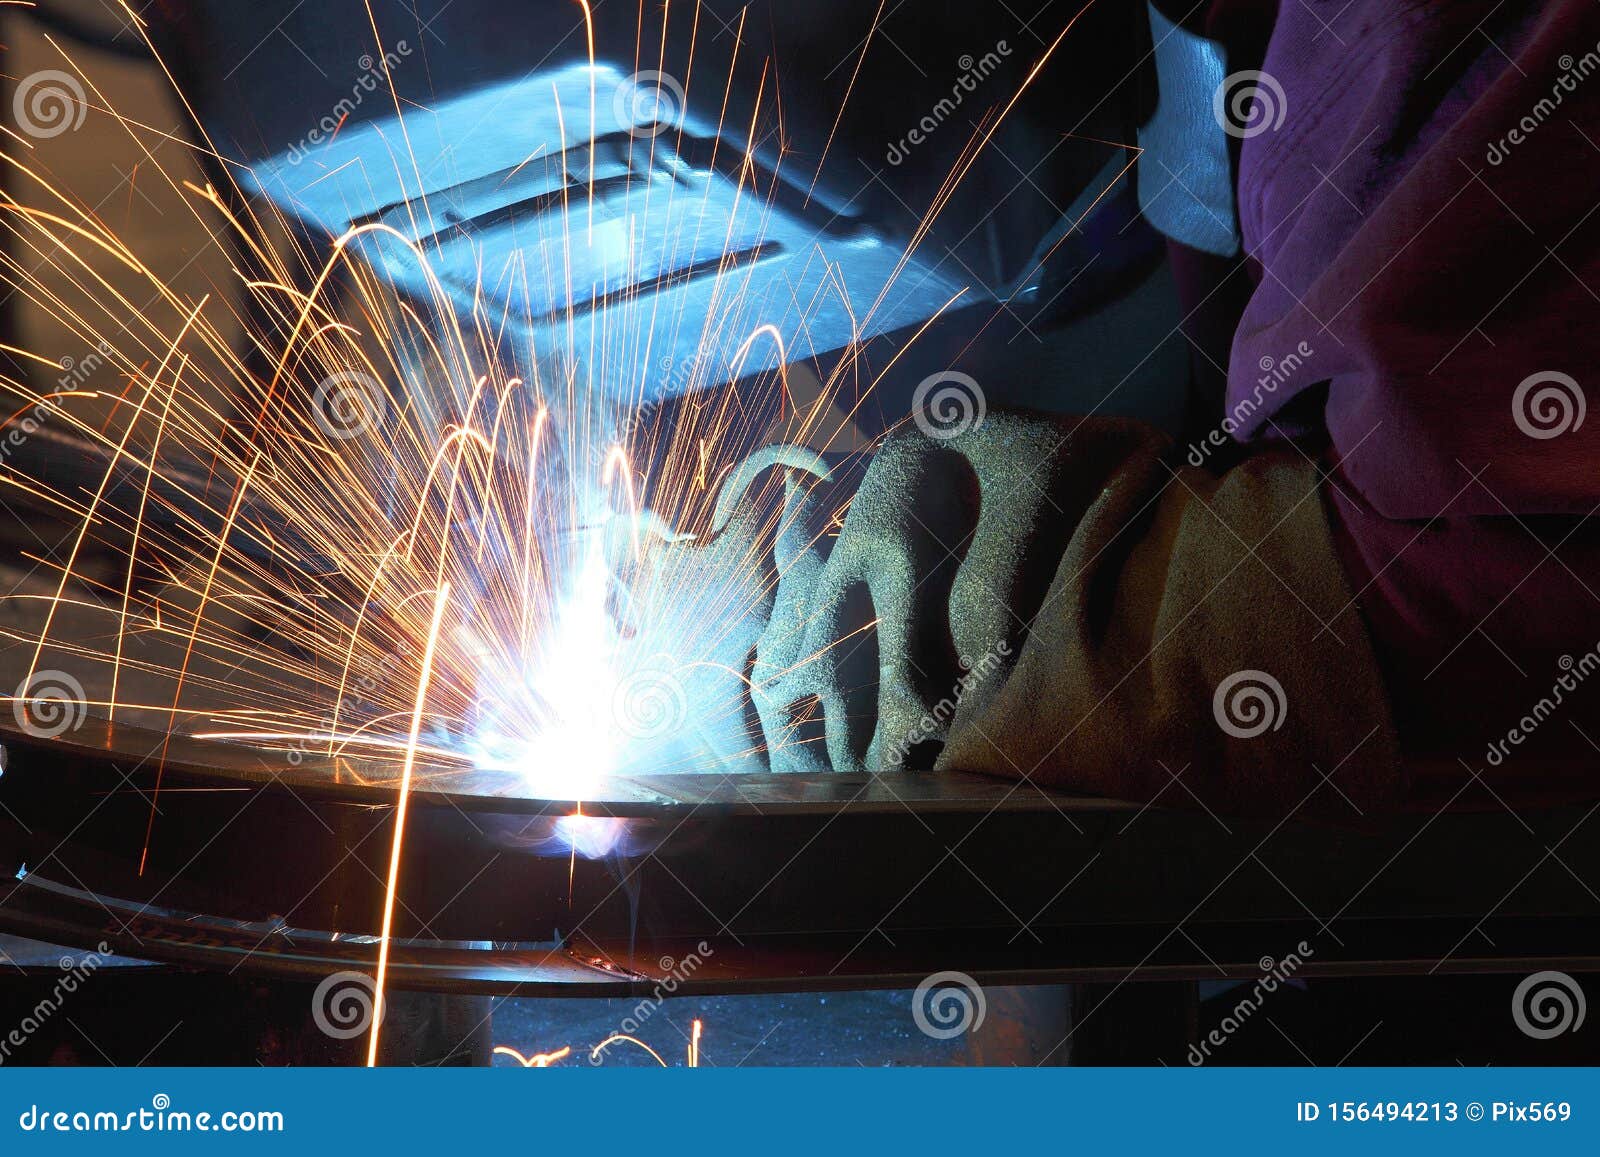 a welder using a wire feed welder to join two pieces of metal together.